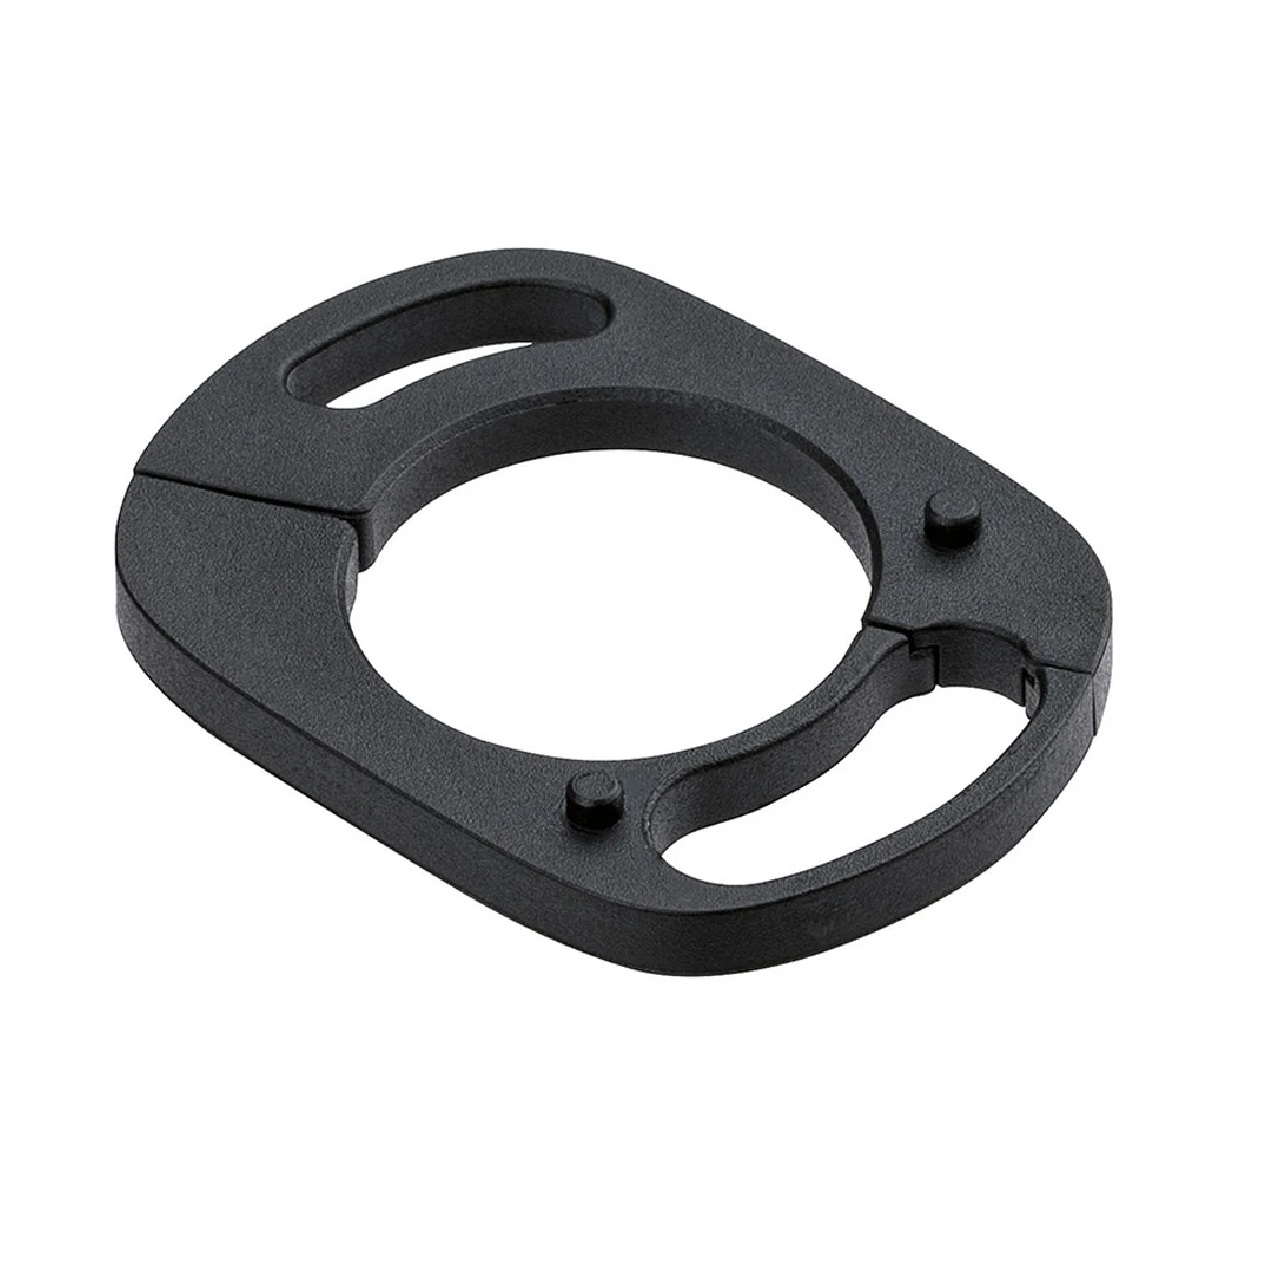 FSA or Vision ACR Stem Spacer 5mm Fits ACR Stems ONLY!